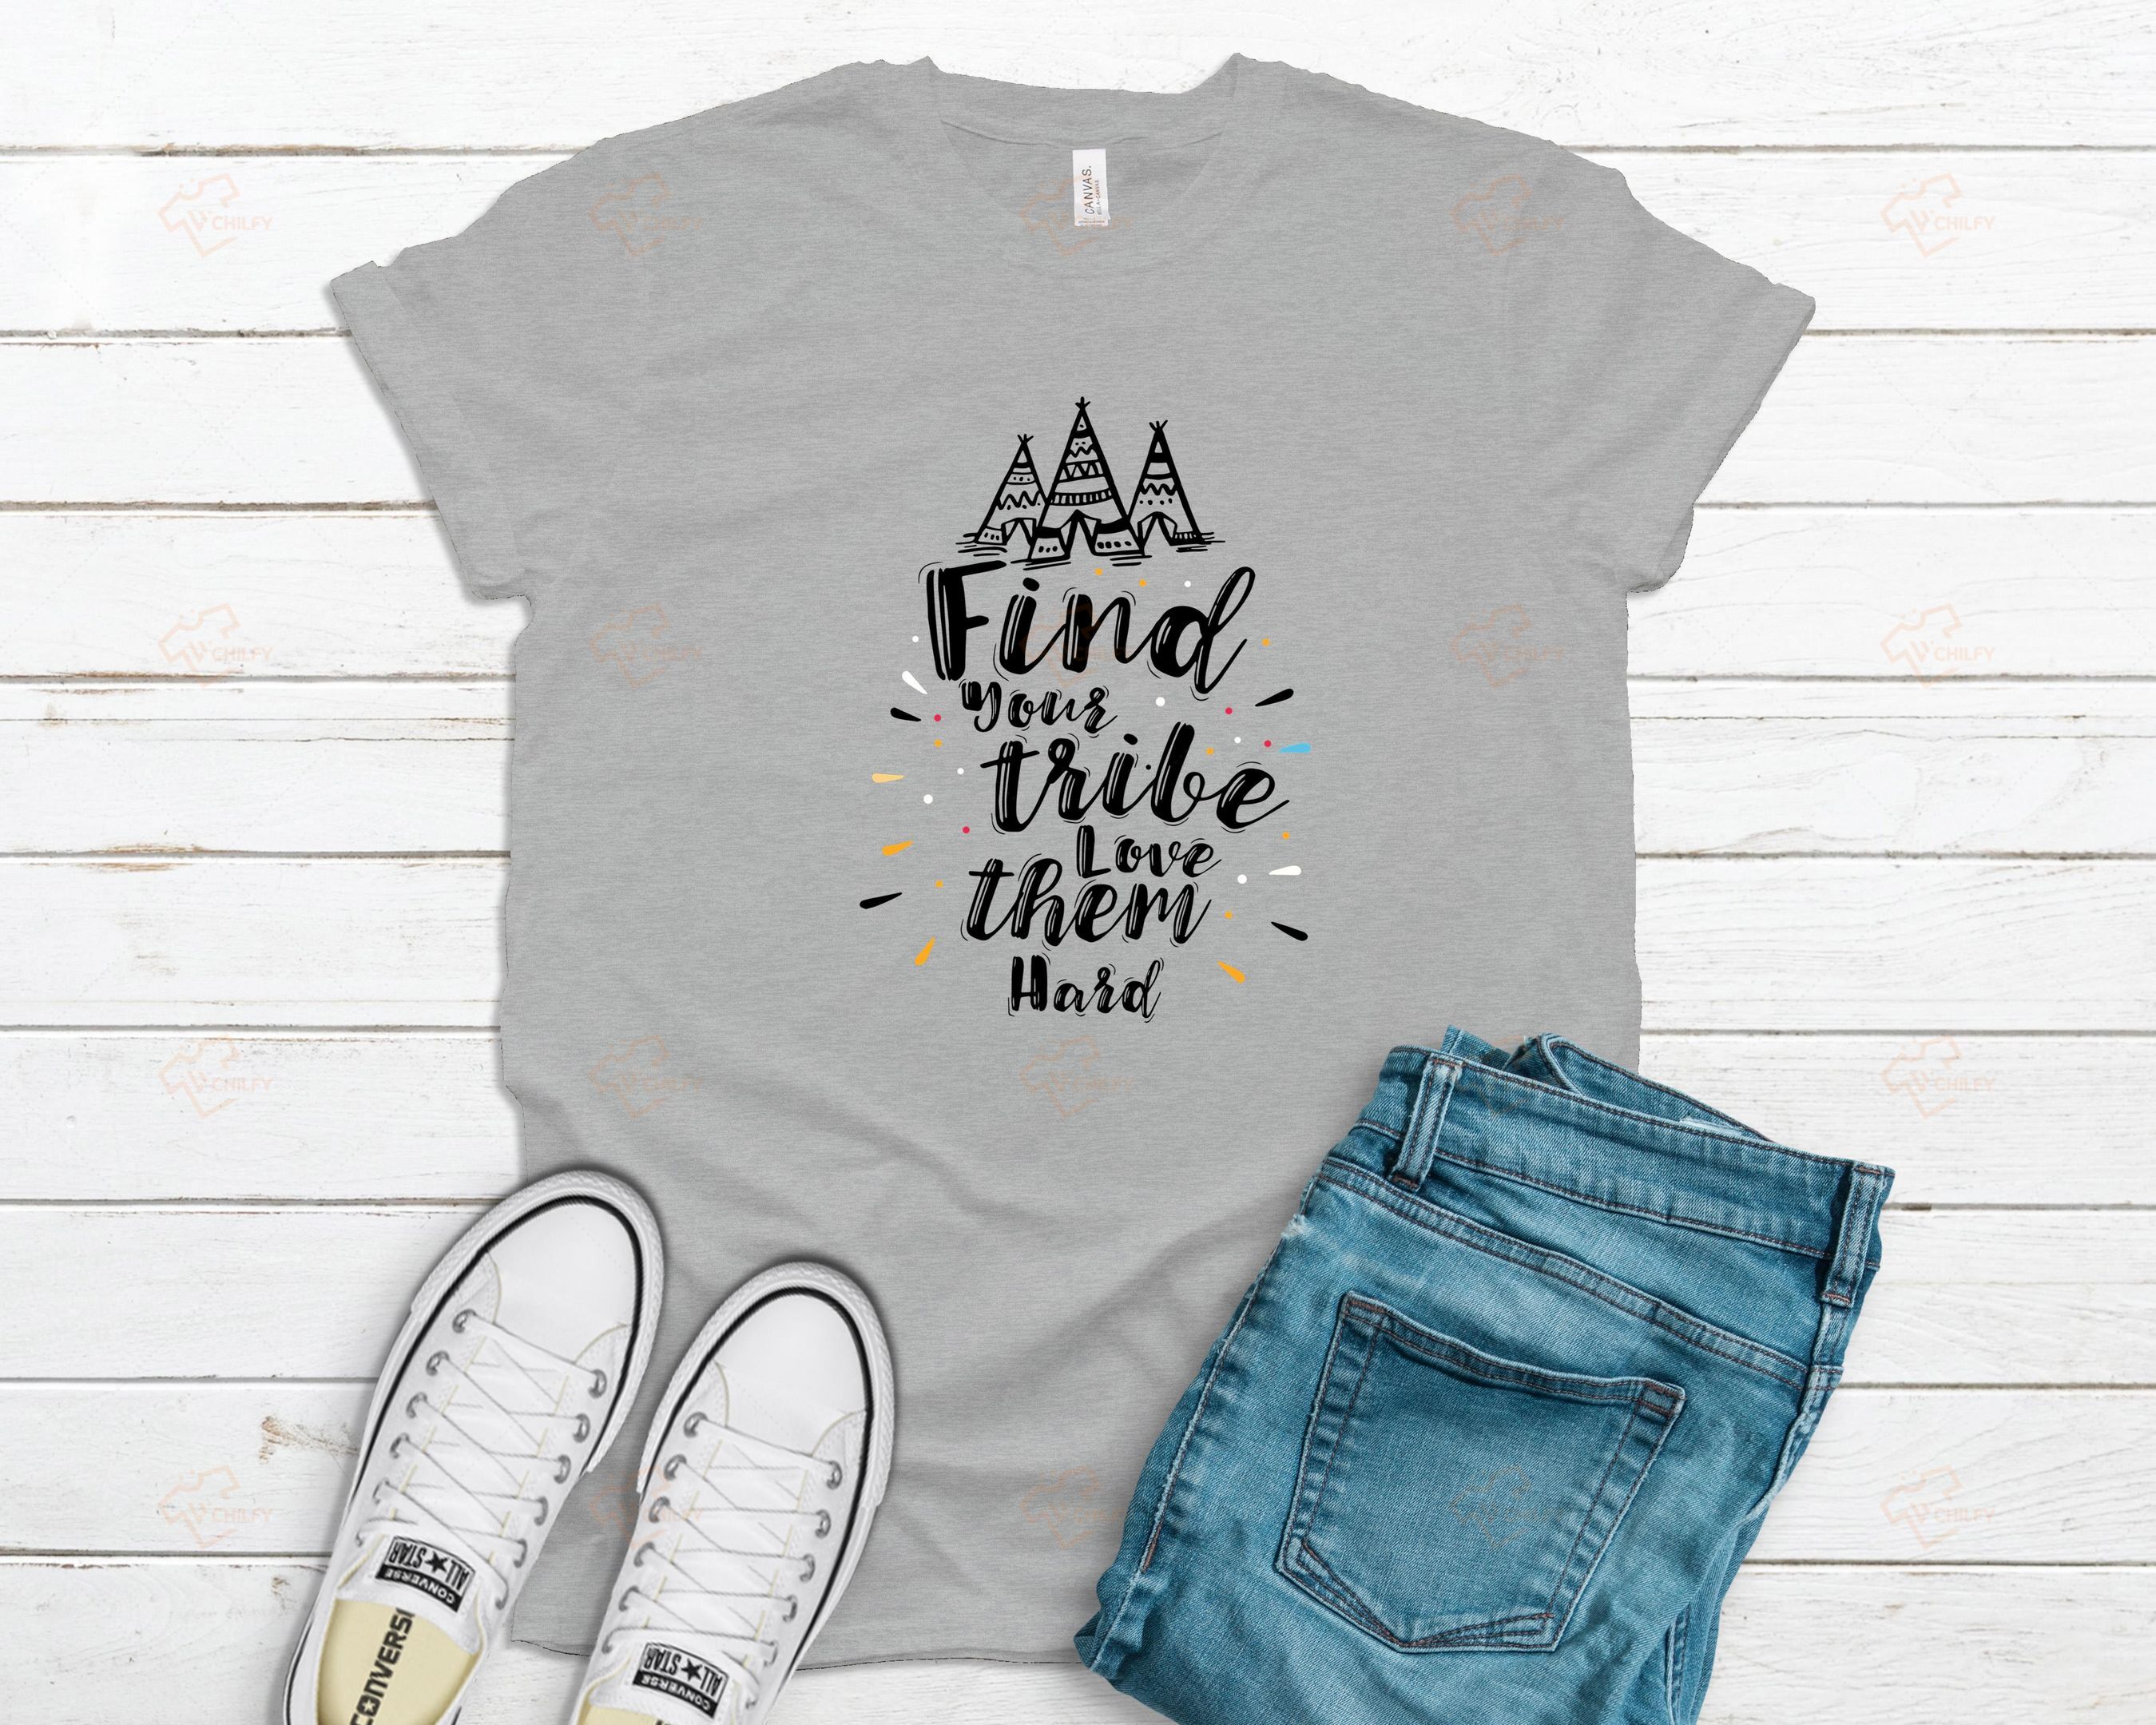 Find your tribe and love them hard t shirt, American indian shirt, Native pride shirt, Native shirt